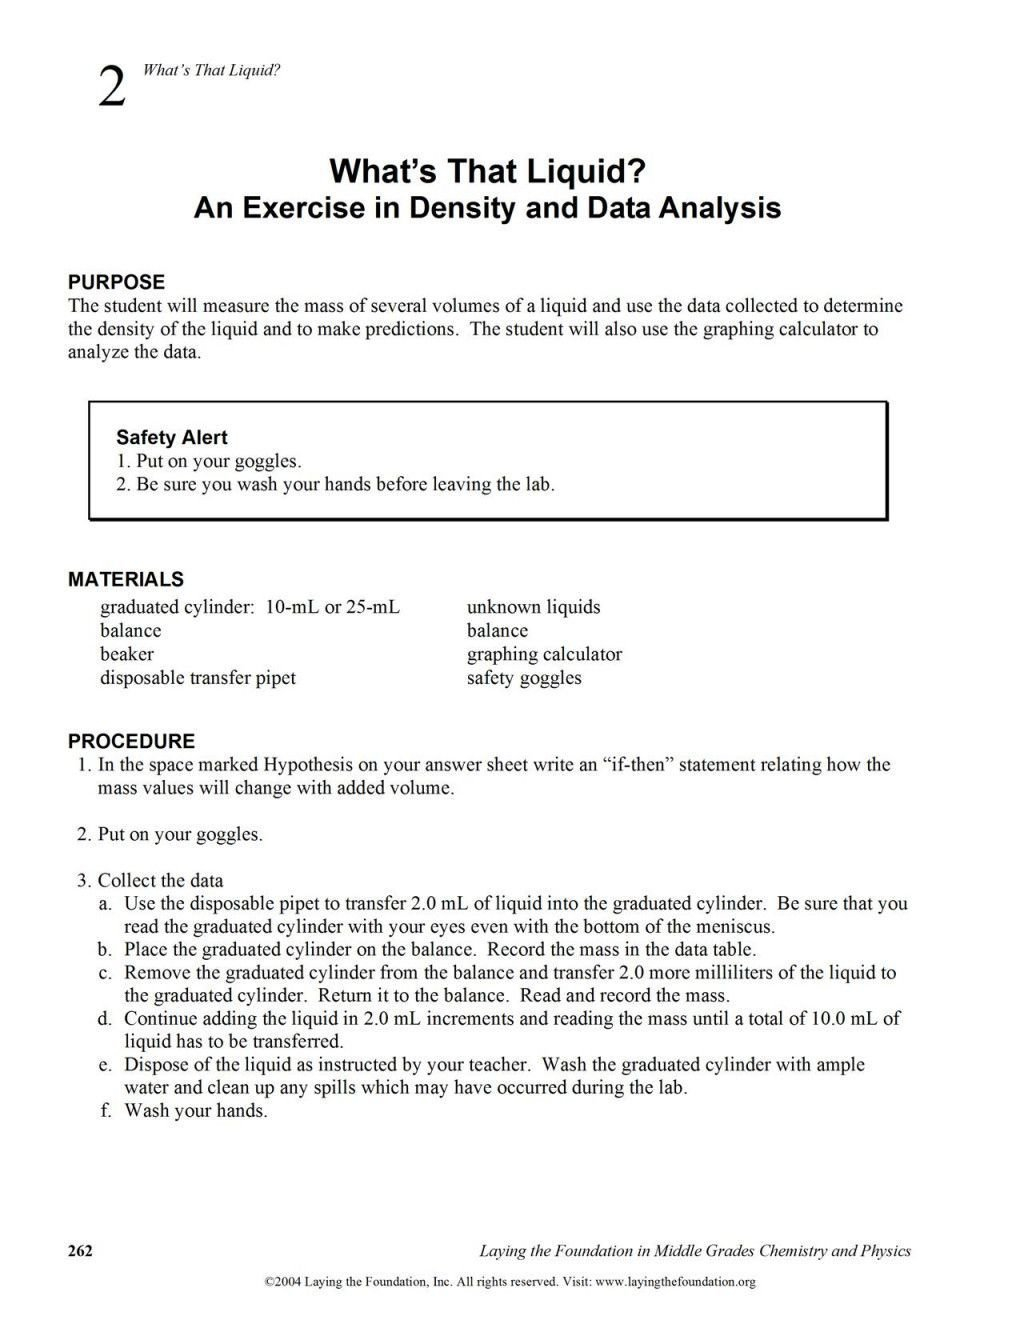 Scientific Method Review Identifying Variables Worksheet As Well As Scientific Method Review Identifying Variables Worksheet